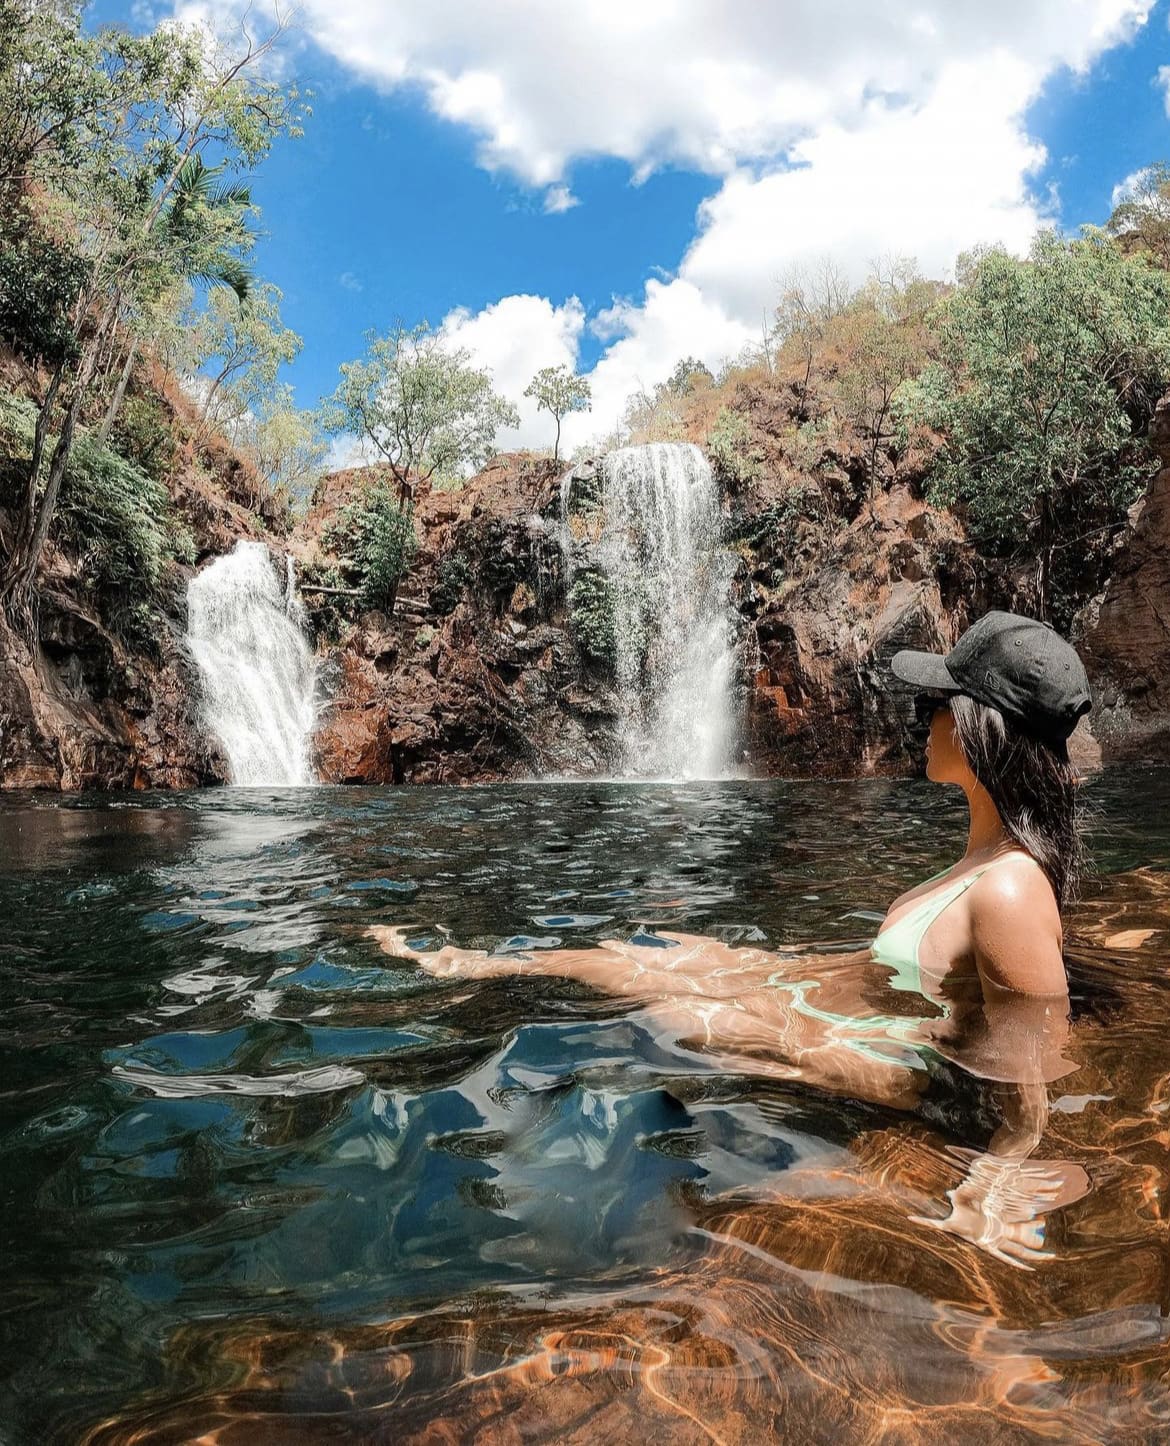 Litchfield National Park Waterfalls - The 20 Best Things To Do In The Northern Territory